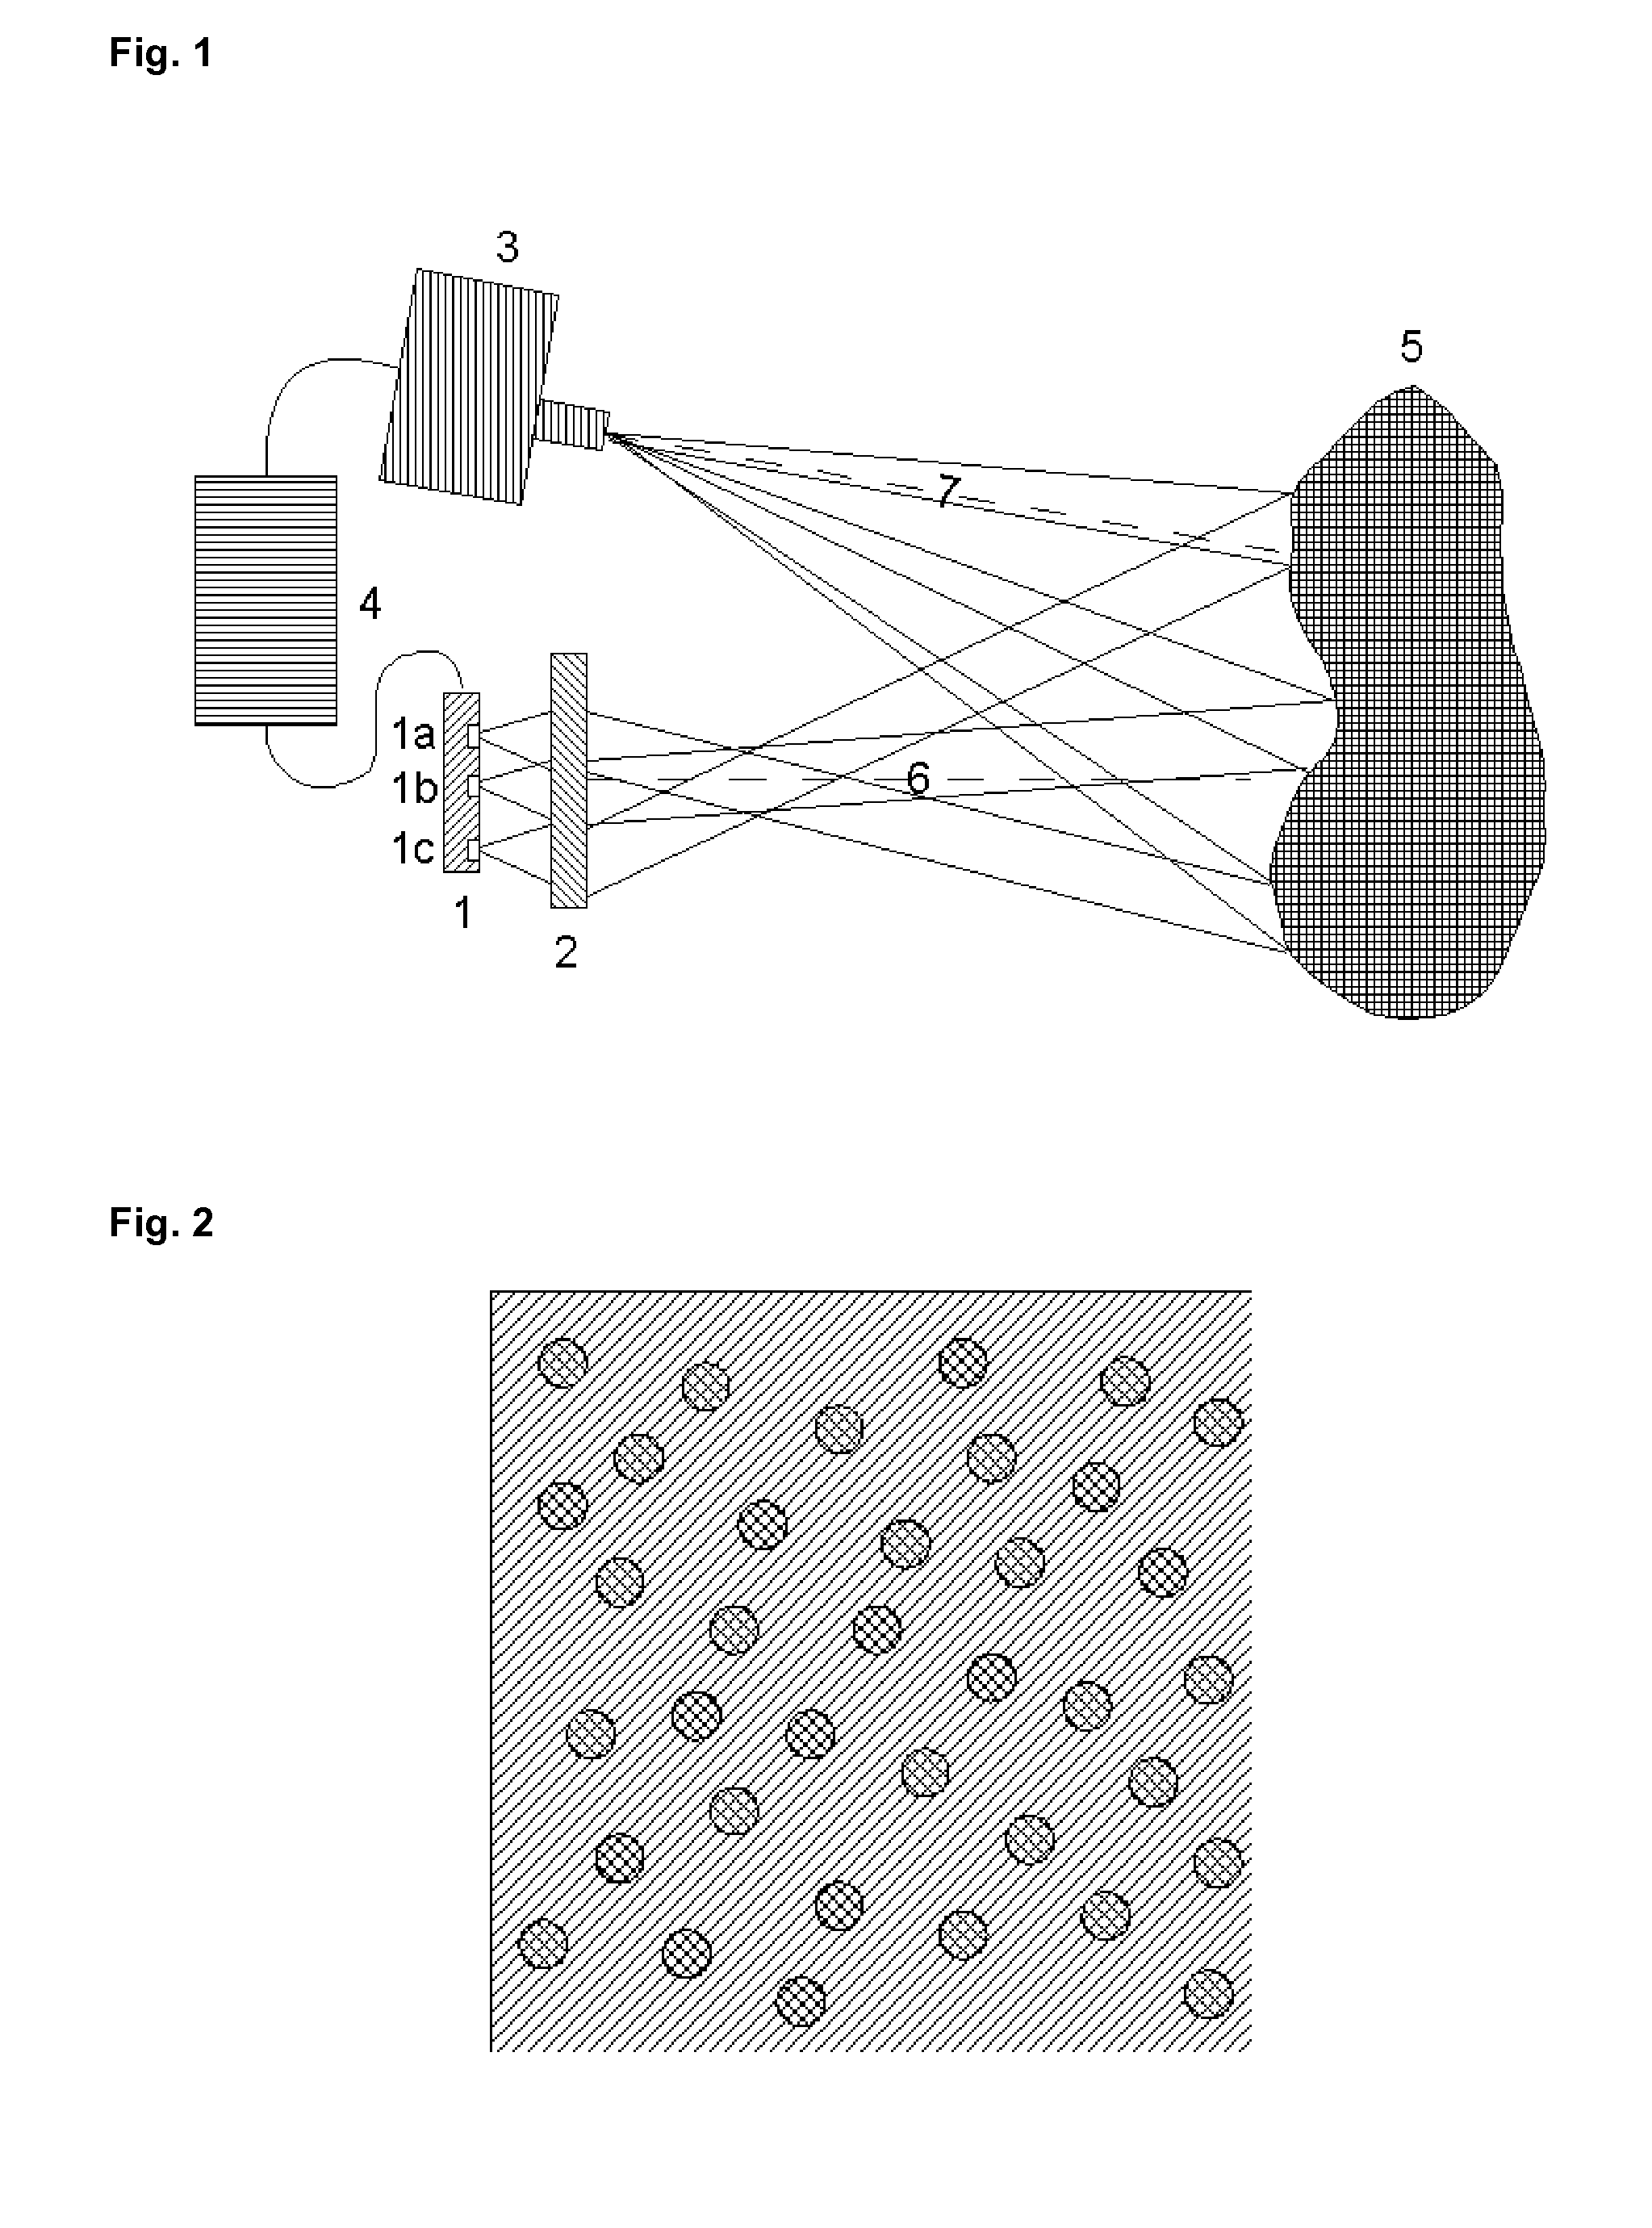 Spatially coded structured light generator